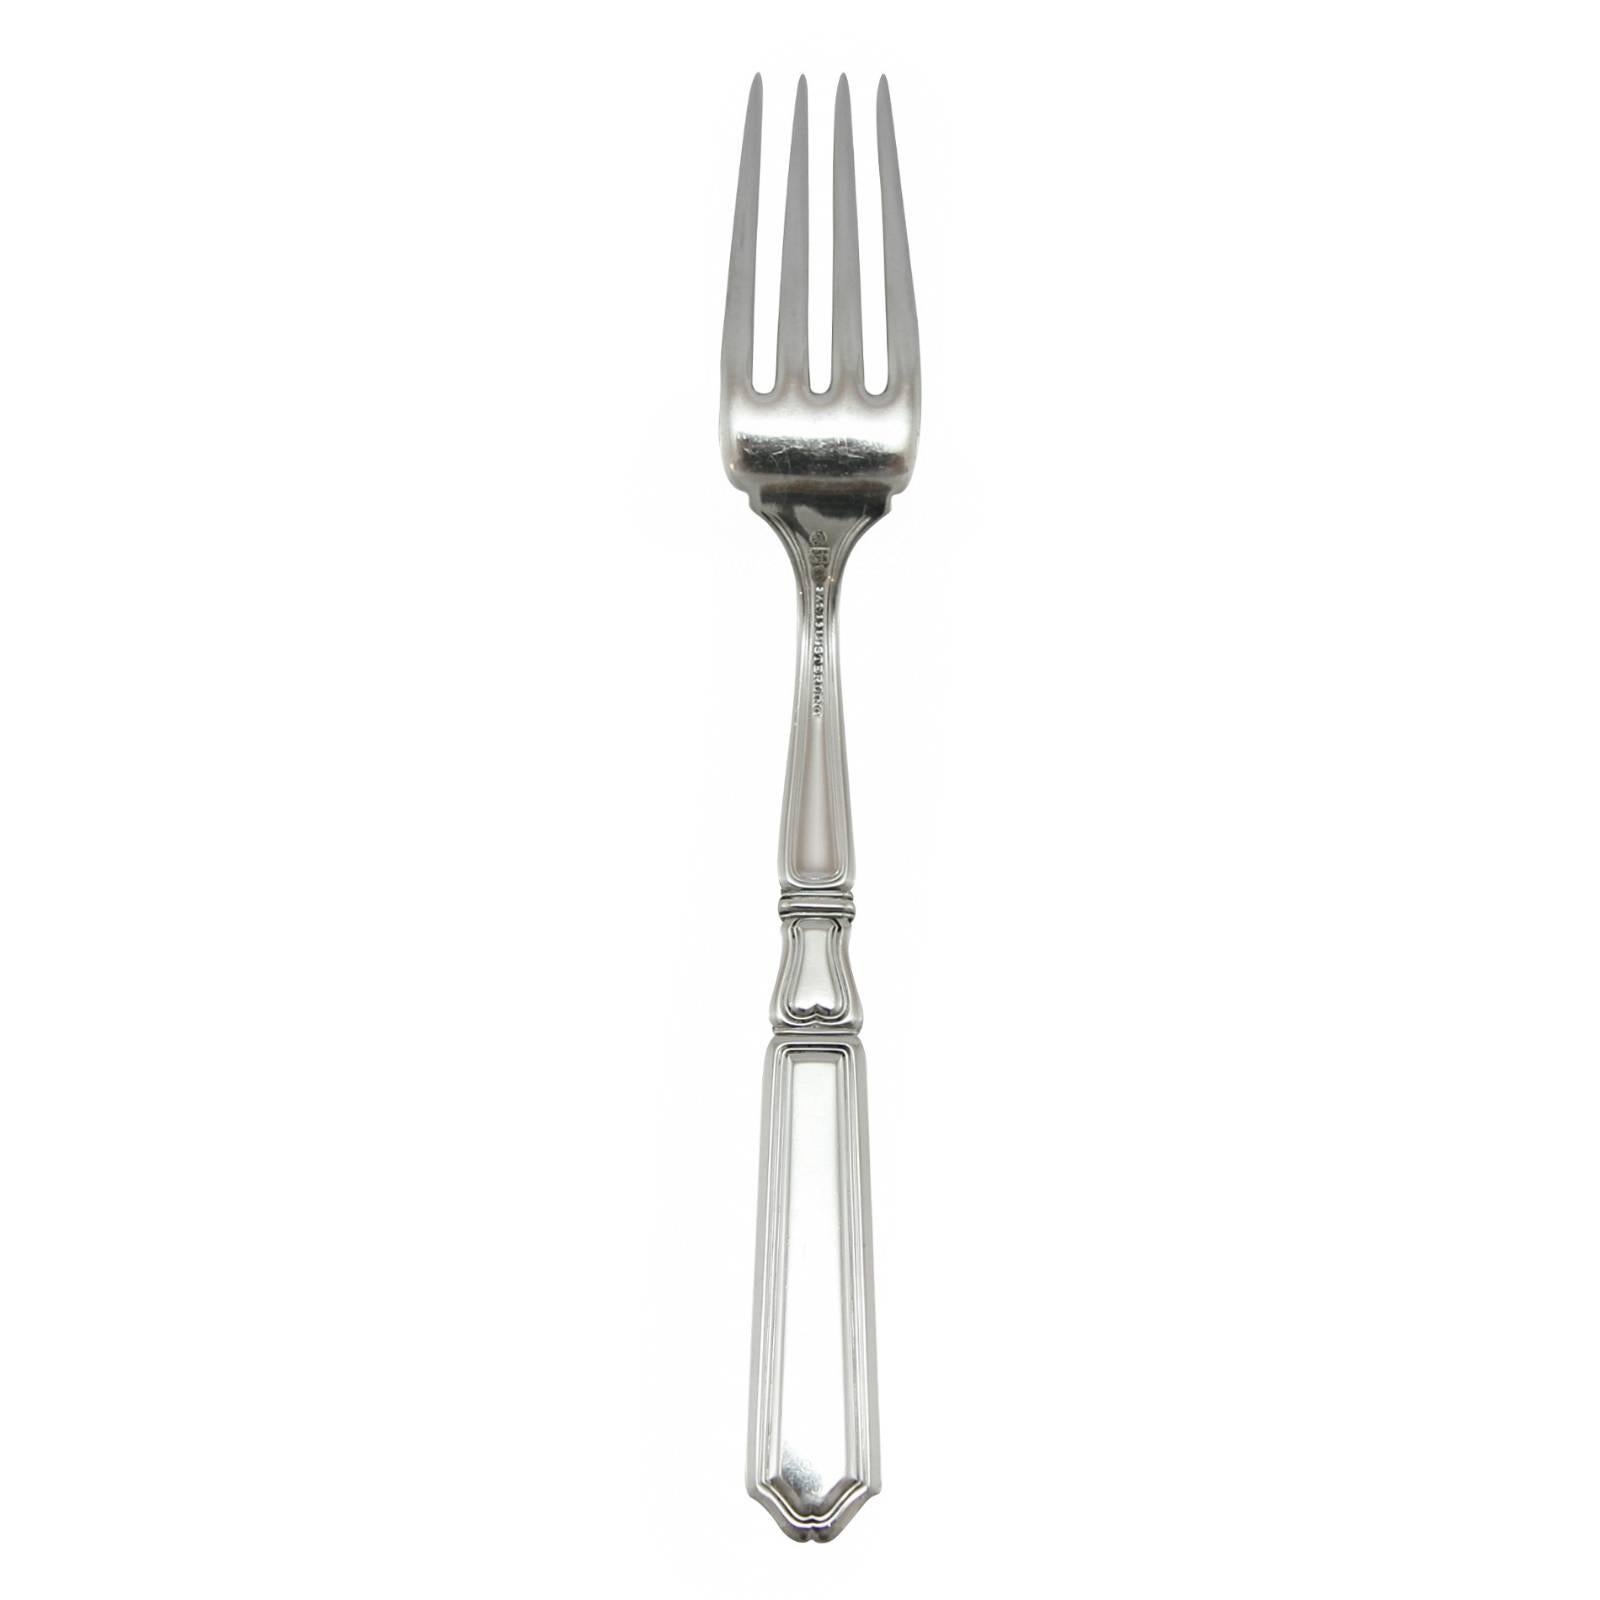 Named for the patron saint of silver and gold smiths. 

12 dinner knives, 12 dinner forks, 12 fish knives, three luncheon knives, ten butter knives, eight grapefruit spoons, eight ice cream spoon forks, one round serving spoon, one oval serving